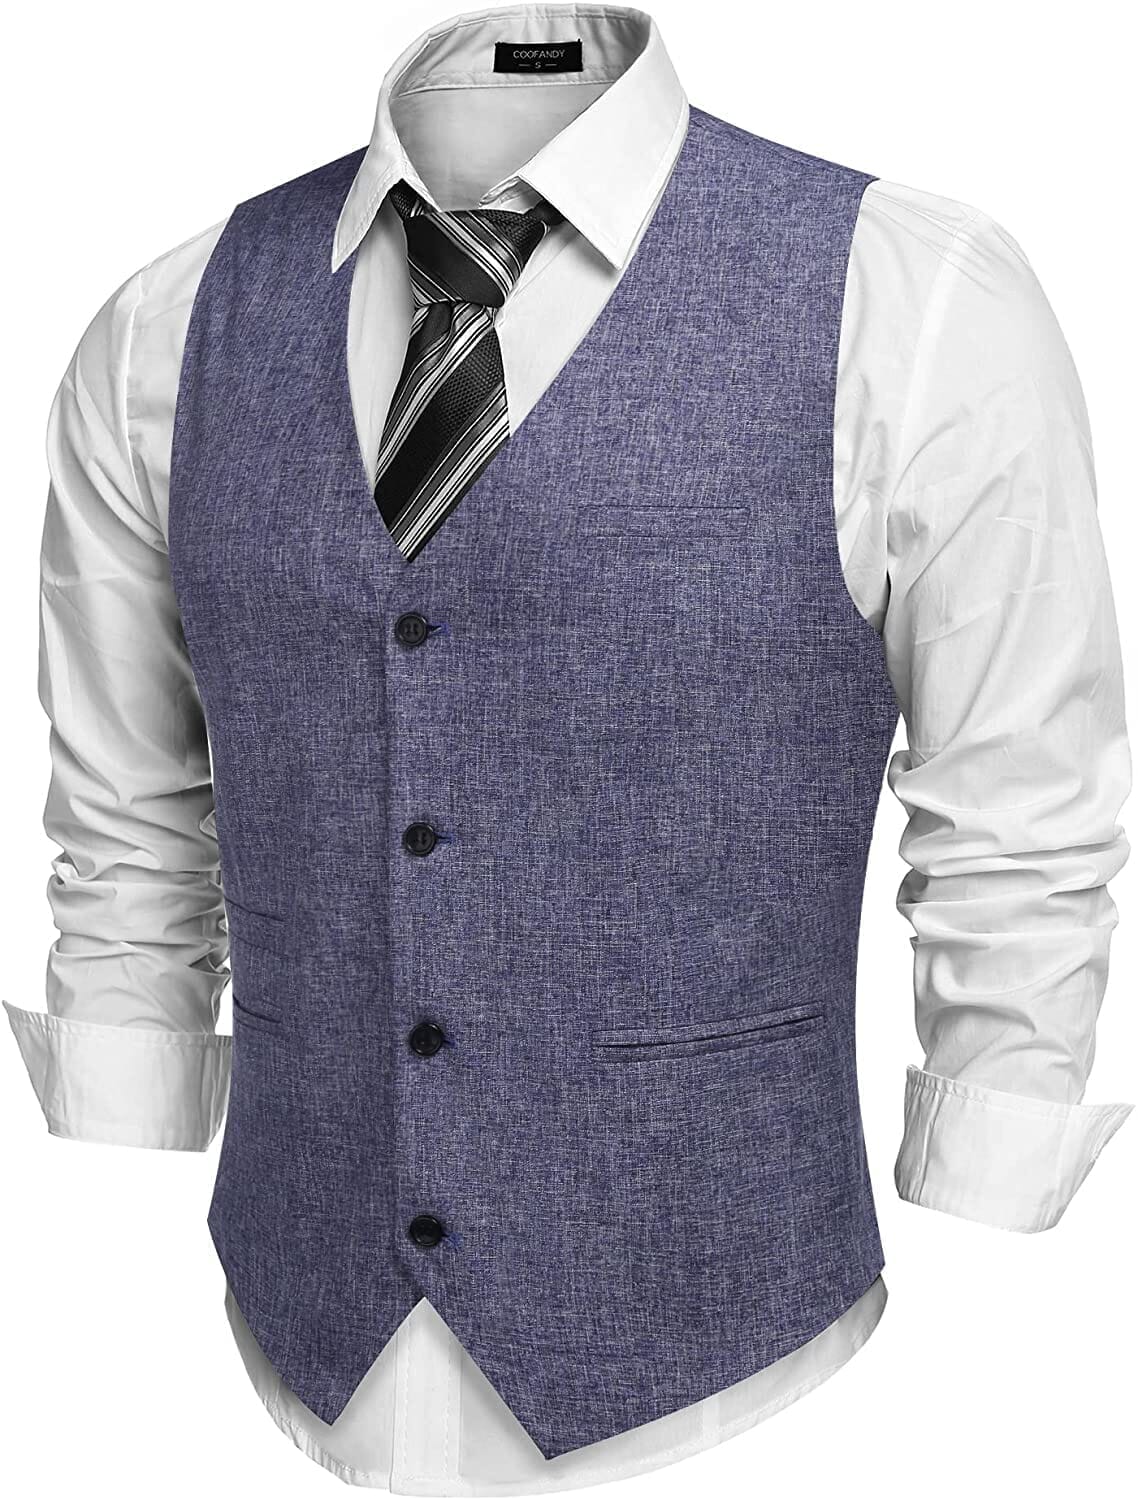 Waistcoat Business Vests (US Only) – coofandy